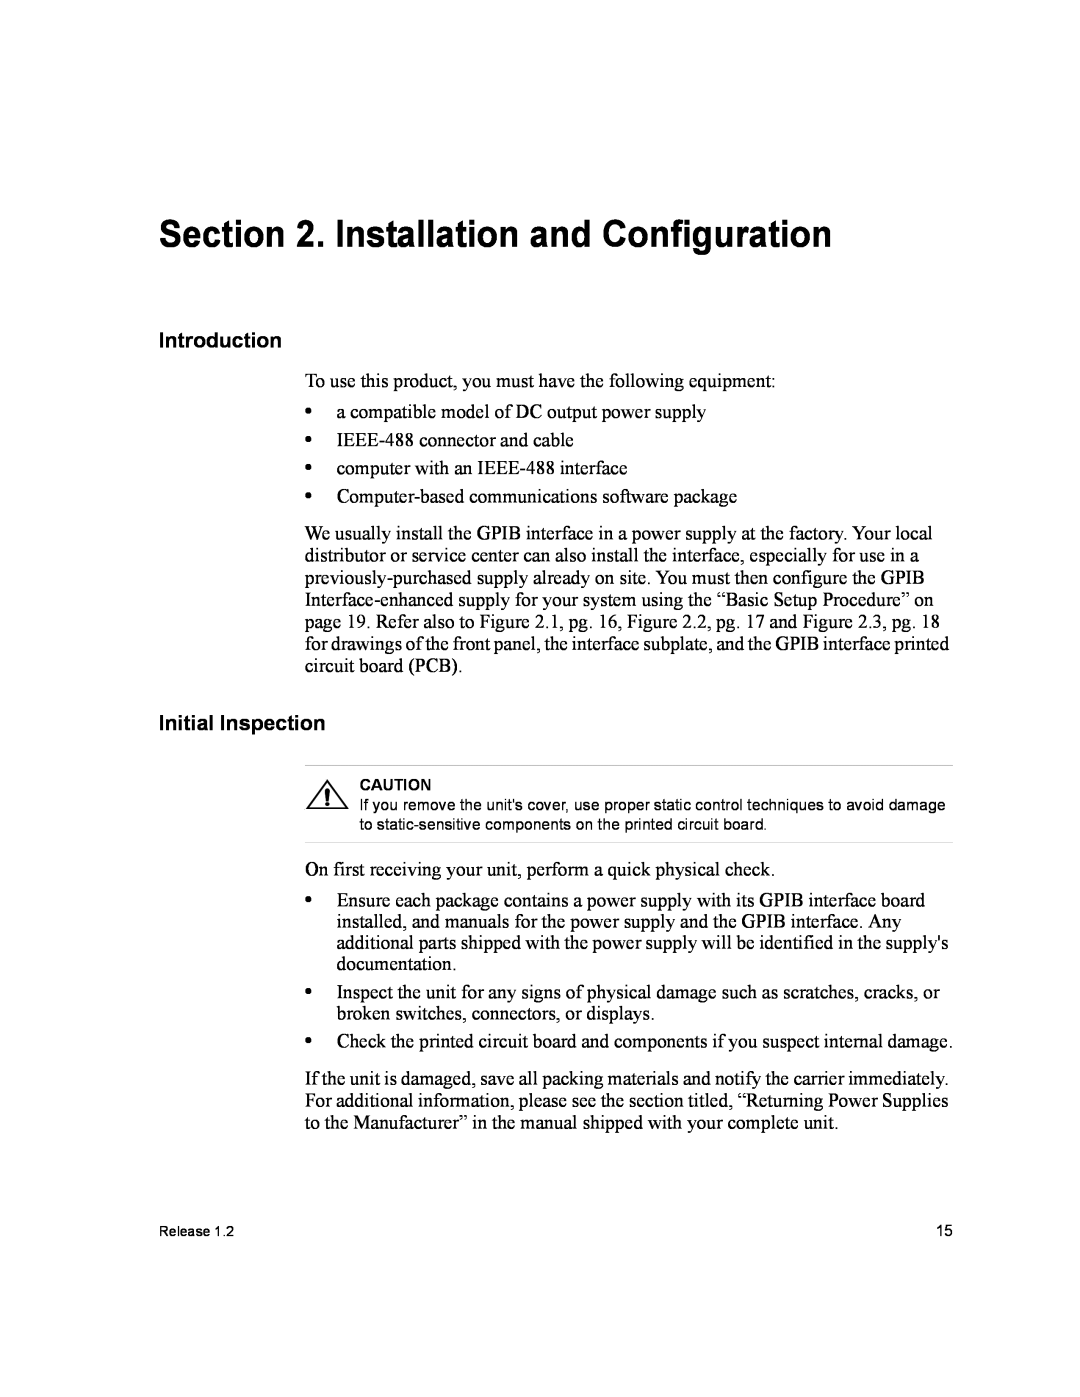 Xantrex Technology GPIB-XPD manual Installation and Configuration, Introduction, Initial Inspection 